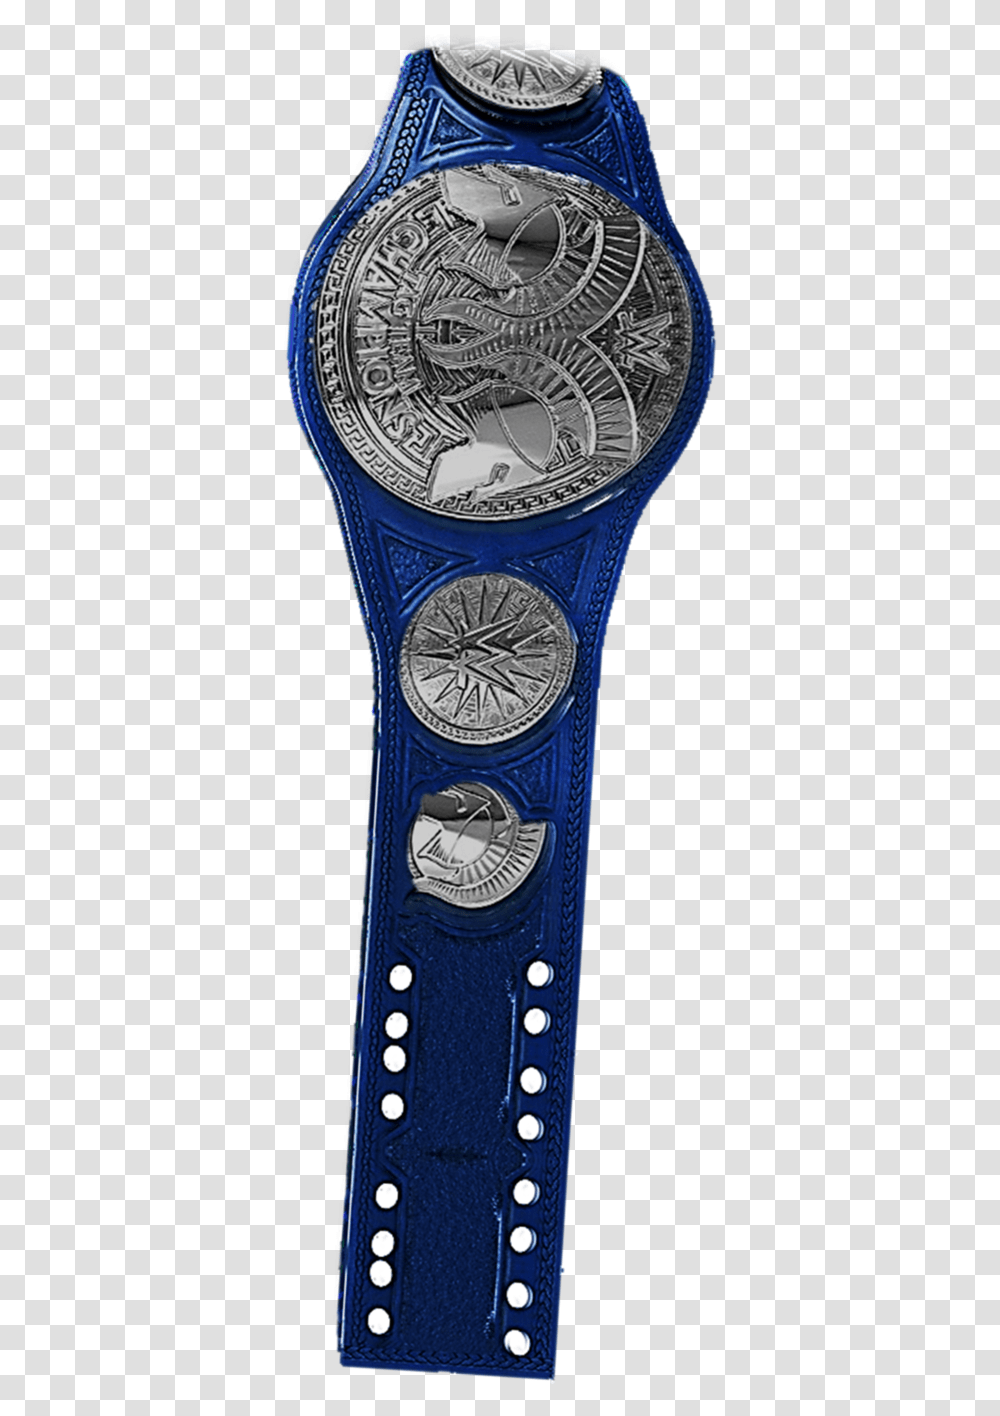 Wwe Smackdown Tag Team Championship Download Smackdown Tag Team Championship, Wristwatch, Clock Tower, Building Transparent Png